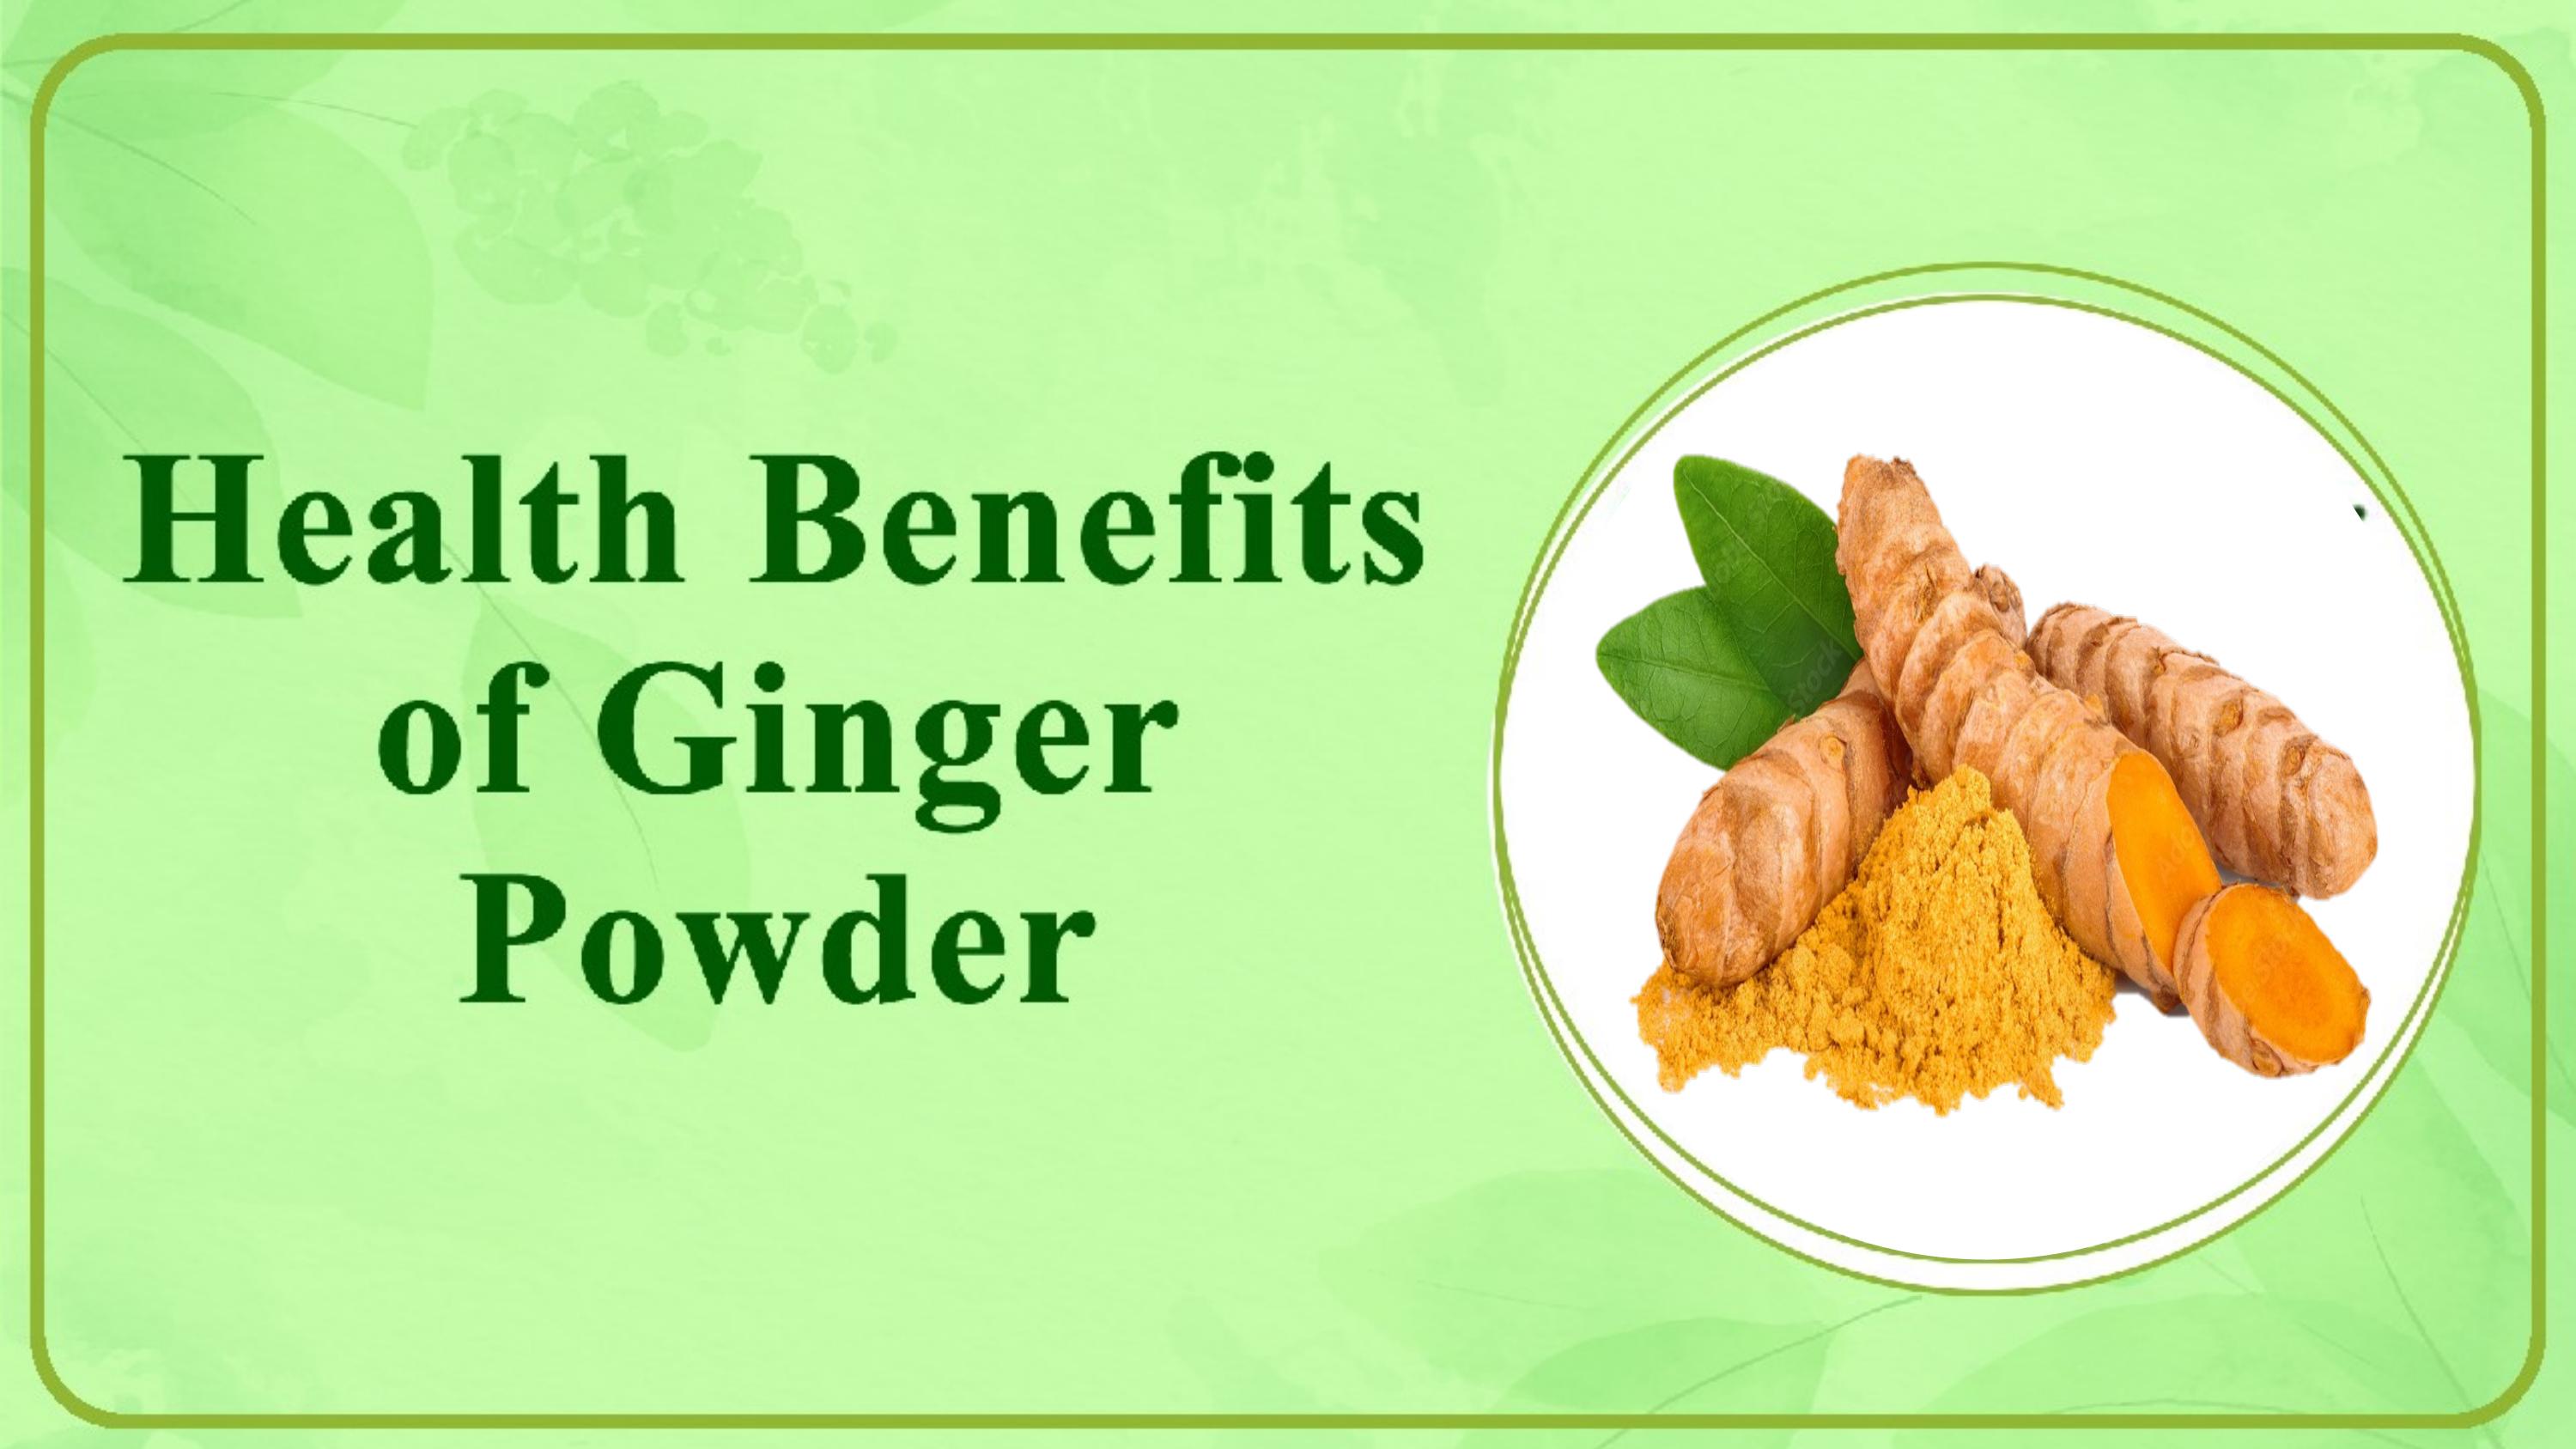 Why Ginger Powder is Good for Health?